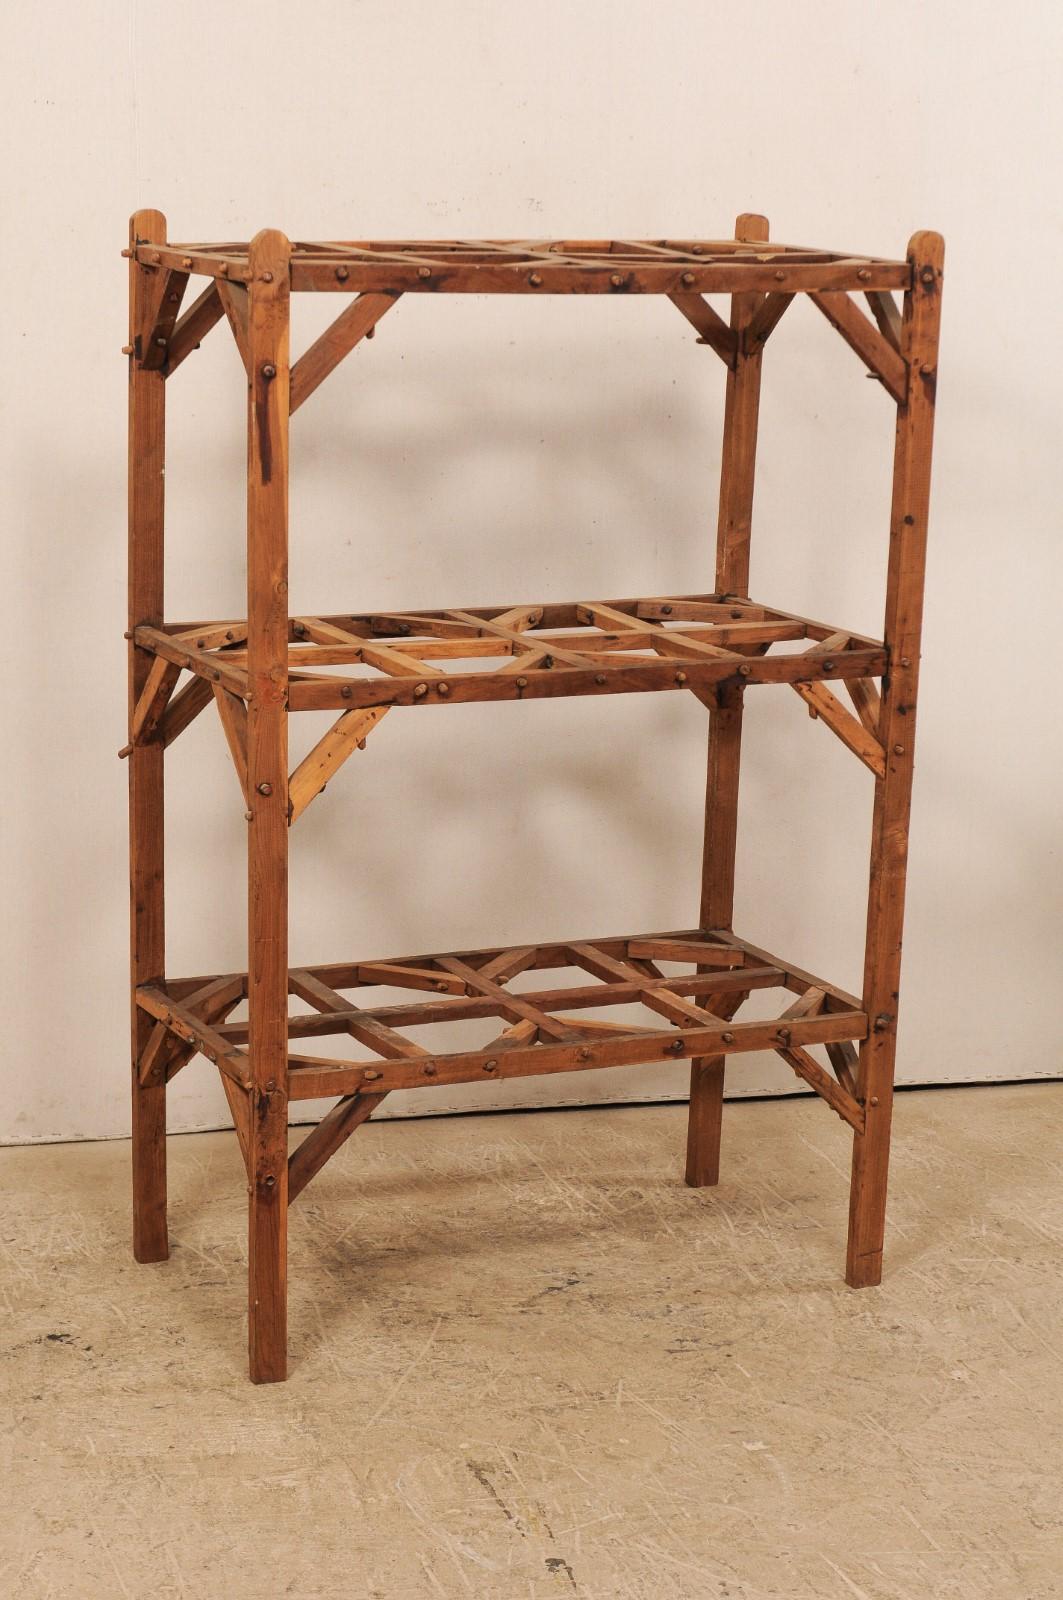 A French artistically designed wood open shelving unit from the mid-20th century. This vintage shelf from France, standing just under 5.5 feet in height and almost 2 feet deep, features two open, interior shelves, along with the additional top